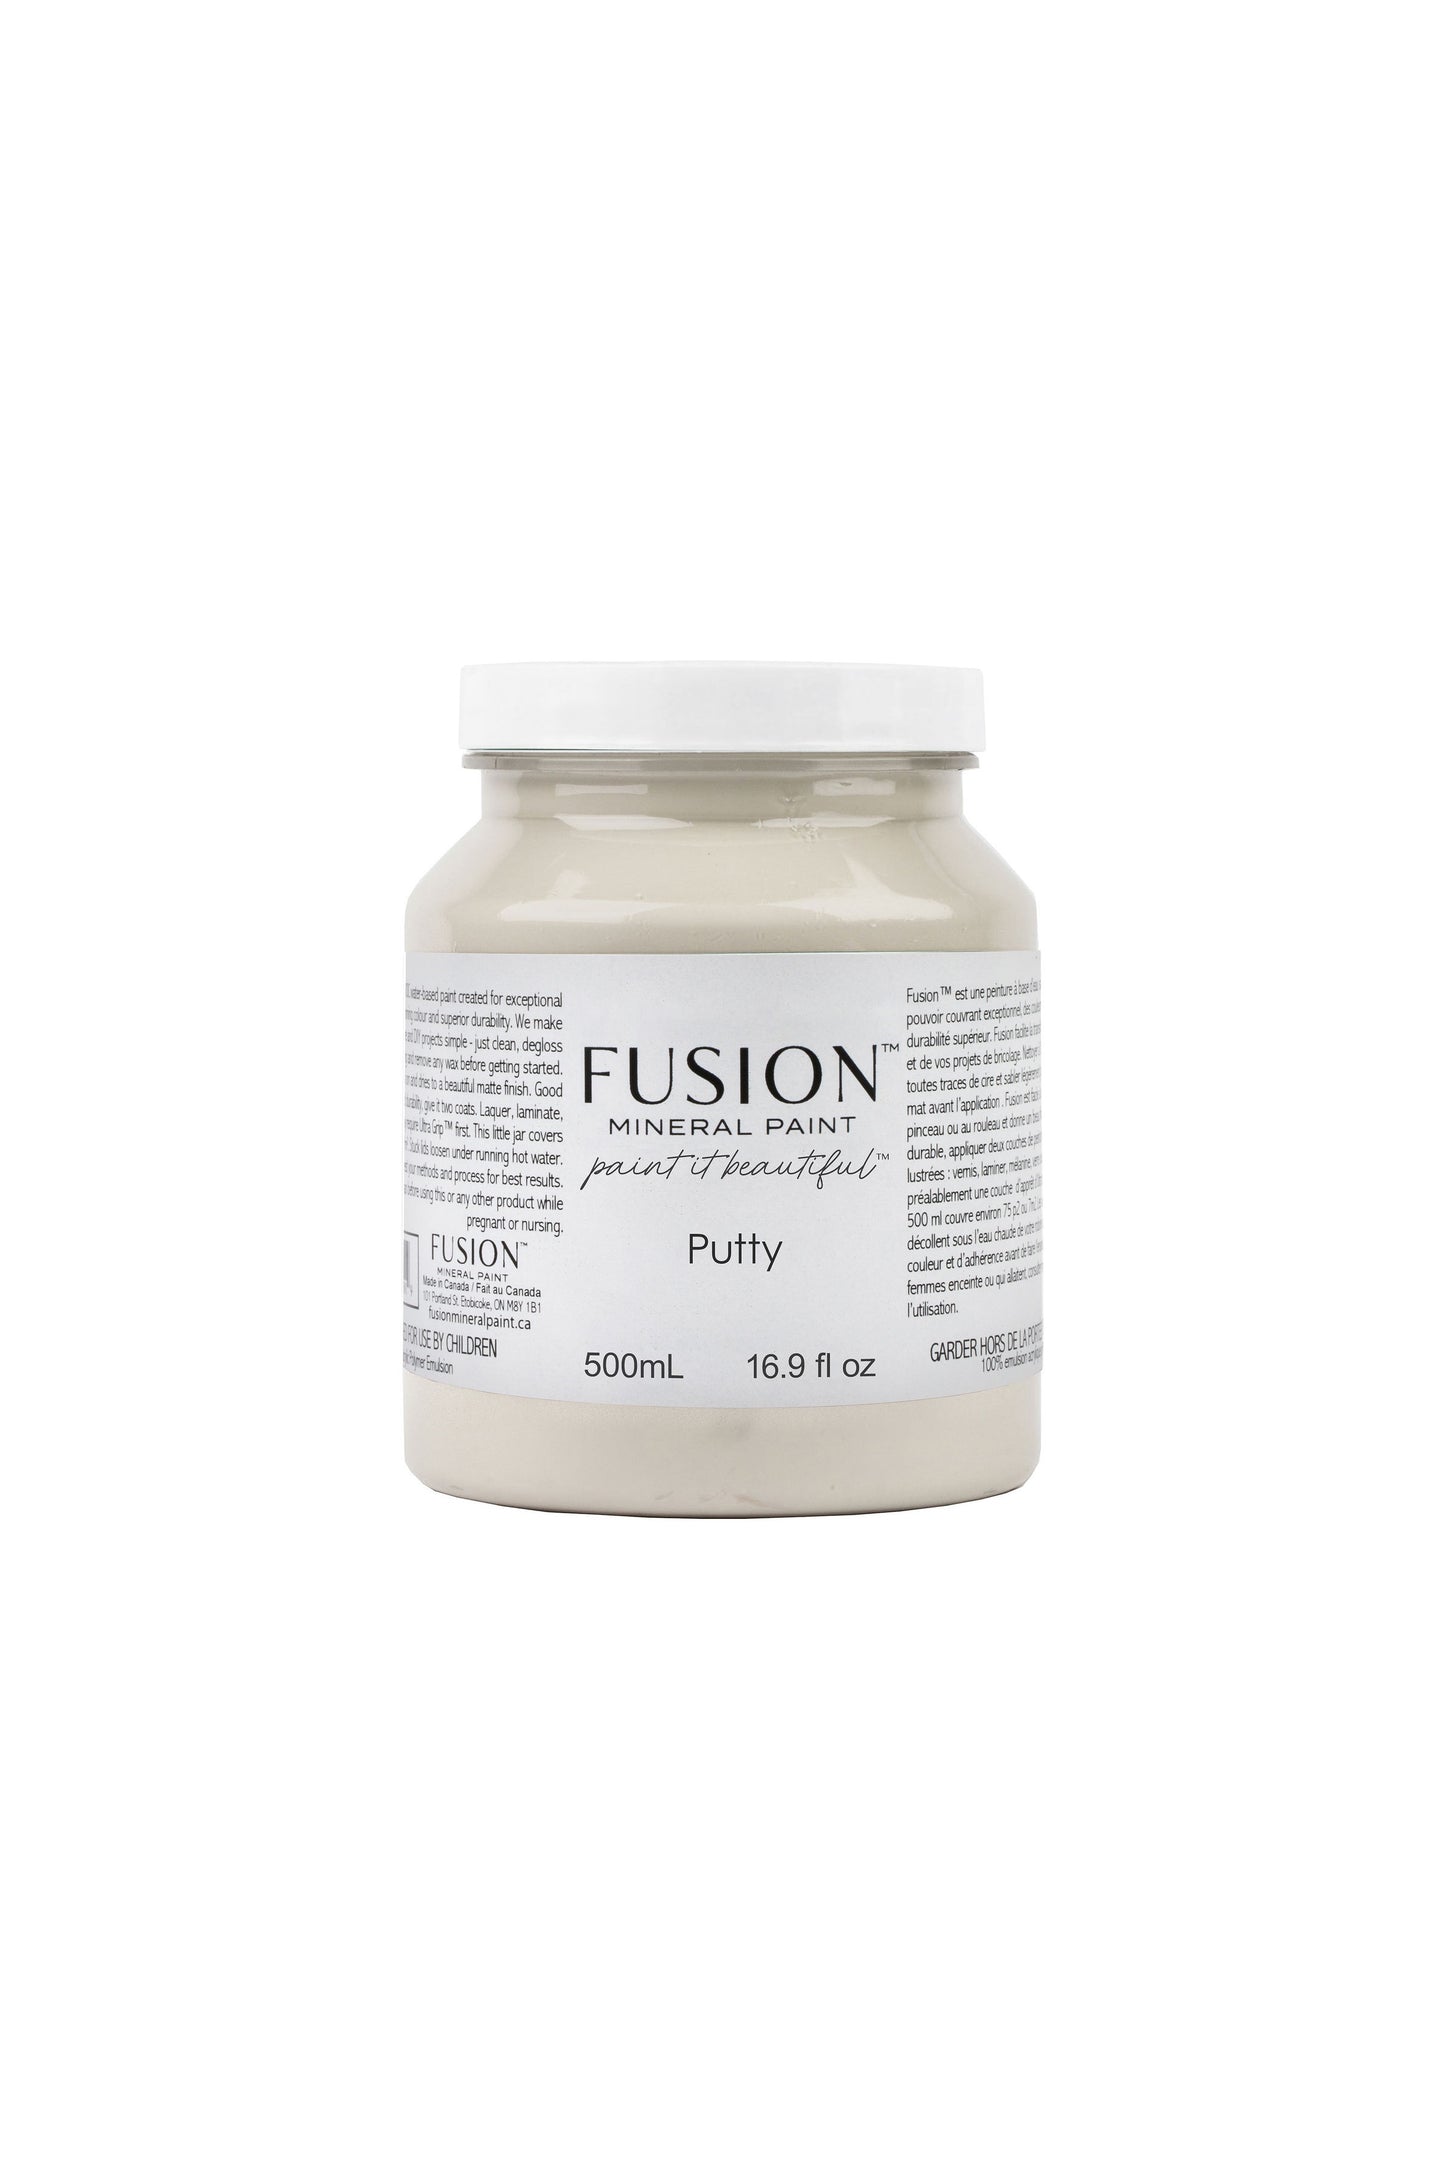 FUSION MINERAL PAINT- Putty